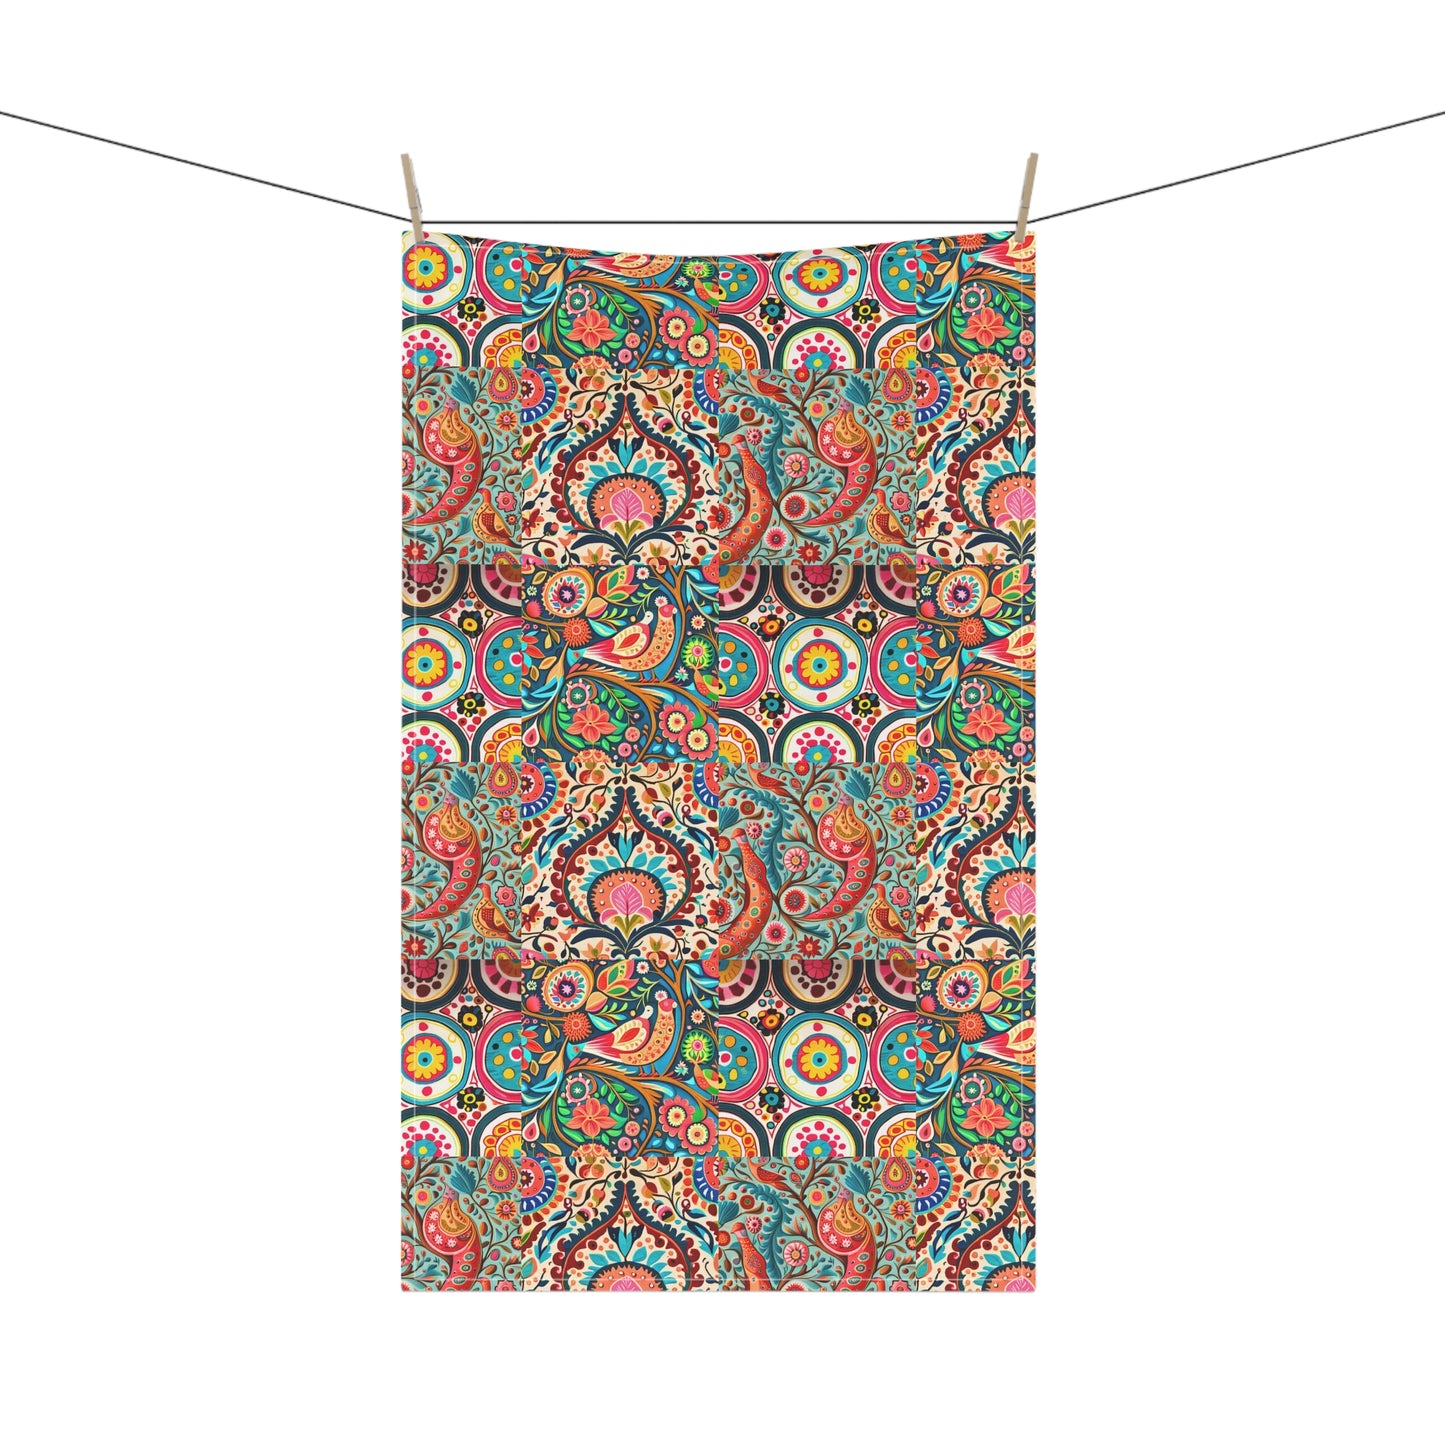 Colorful Suzani Tribal Collage of Patterns Bohemian Collage Decorative Kitchen Tea Towel/Bar Towel